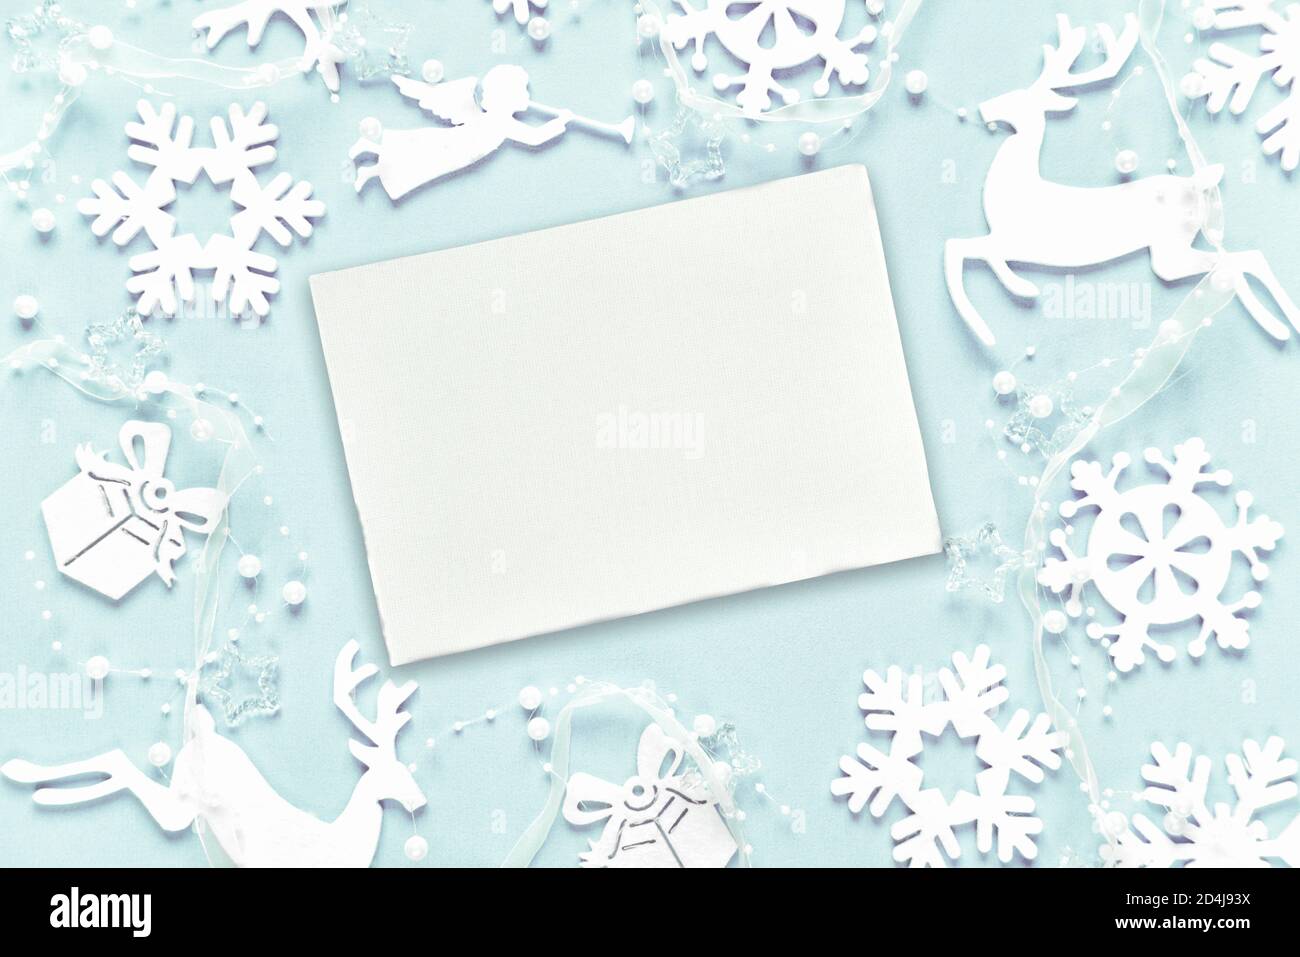 Christmas greeting card composed of white christmas decoration: snowflakes, deers, flying angel and gift boxes on blue background. Flat lay compositio Stock Photo